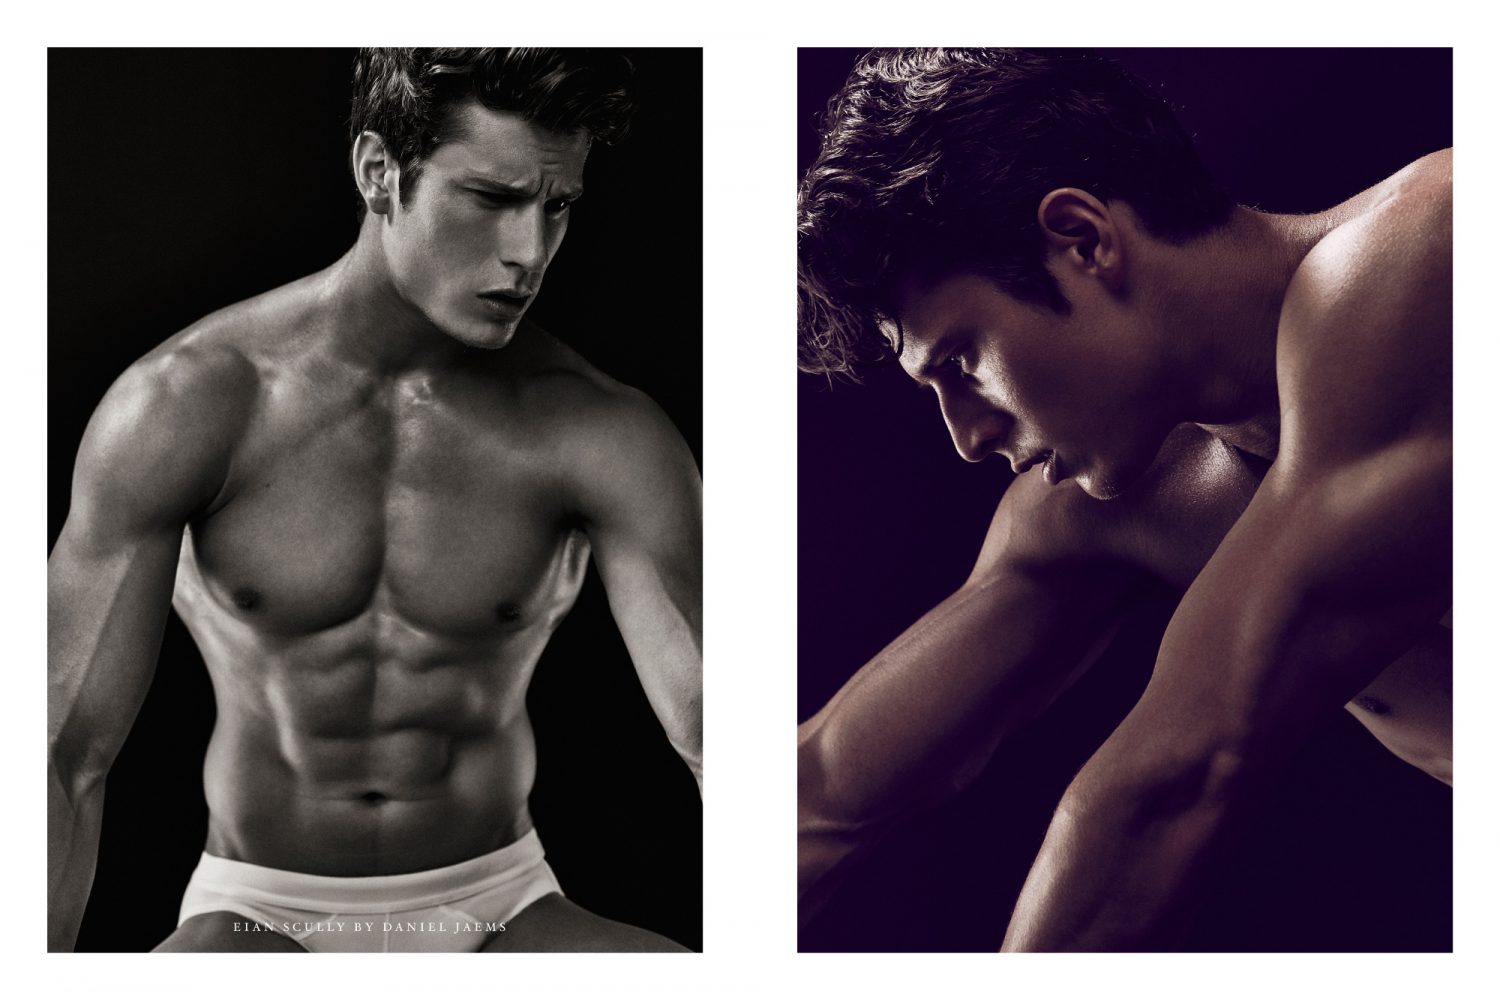 Eian-Scully-by-Daniel-Jaems-Obsession-No17-022-1500x1000